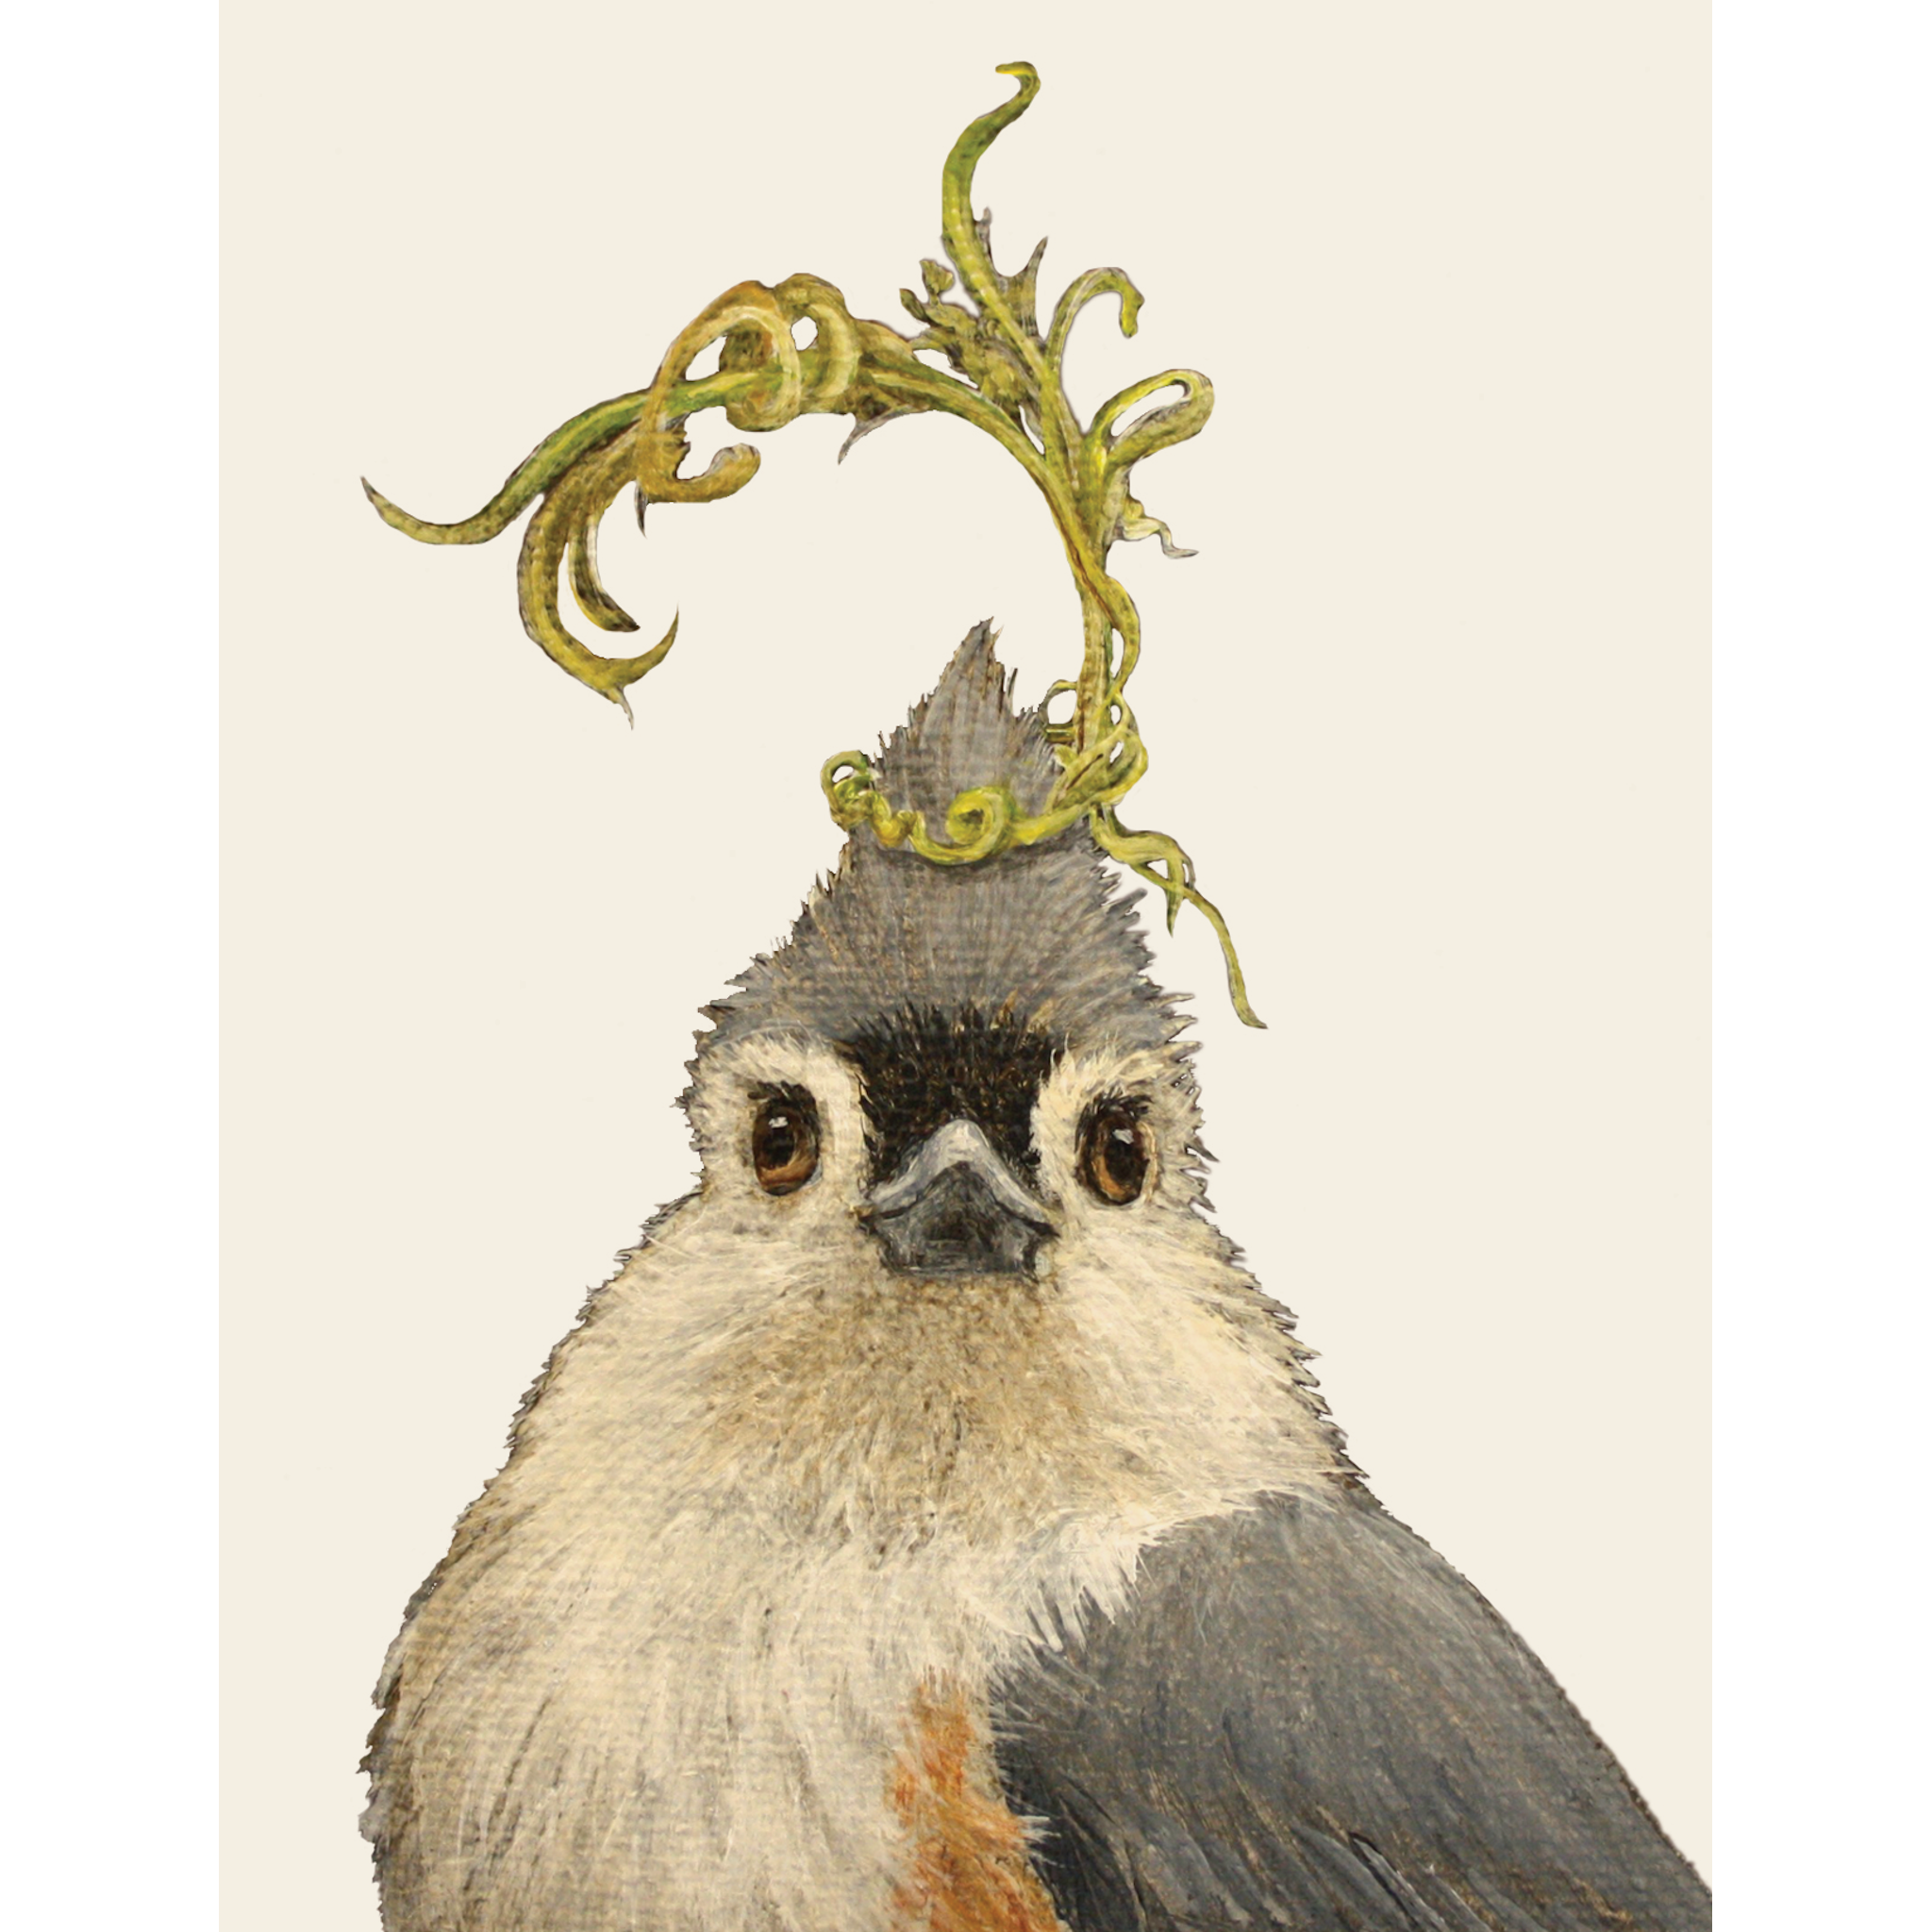 Artwork illustration of a bird with a whimsical crown of green foliage on its head by Hester &amp; Cook.